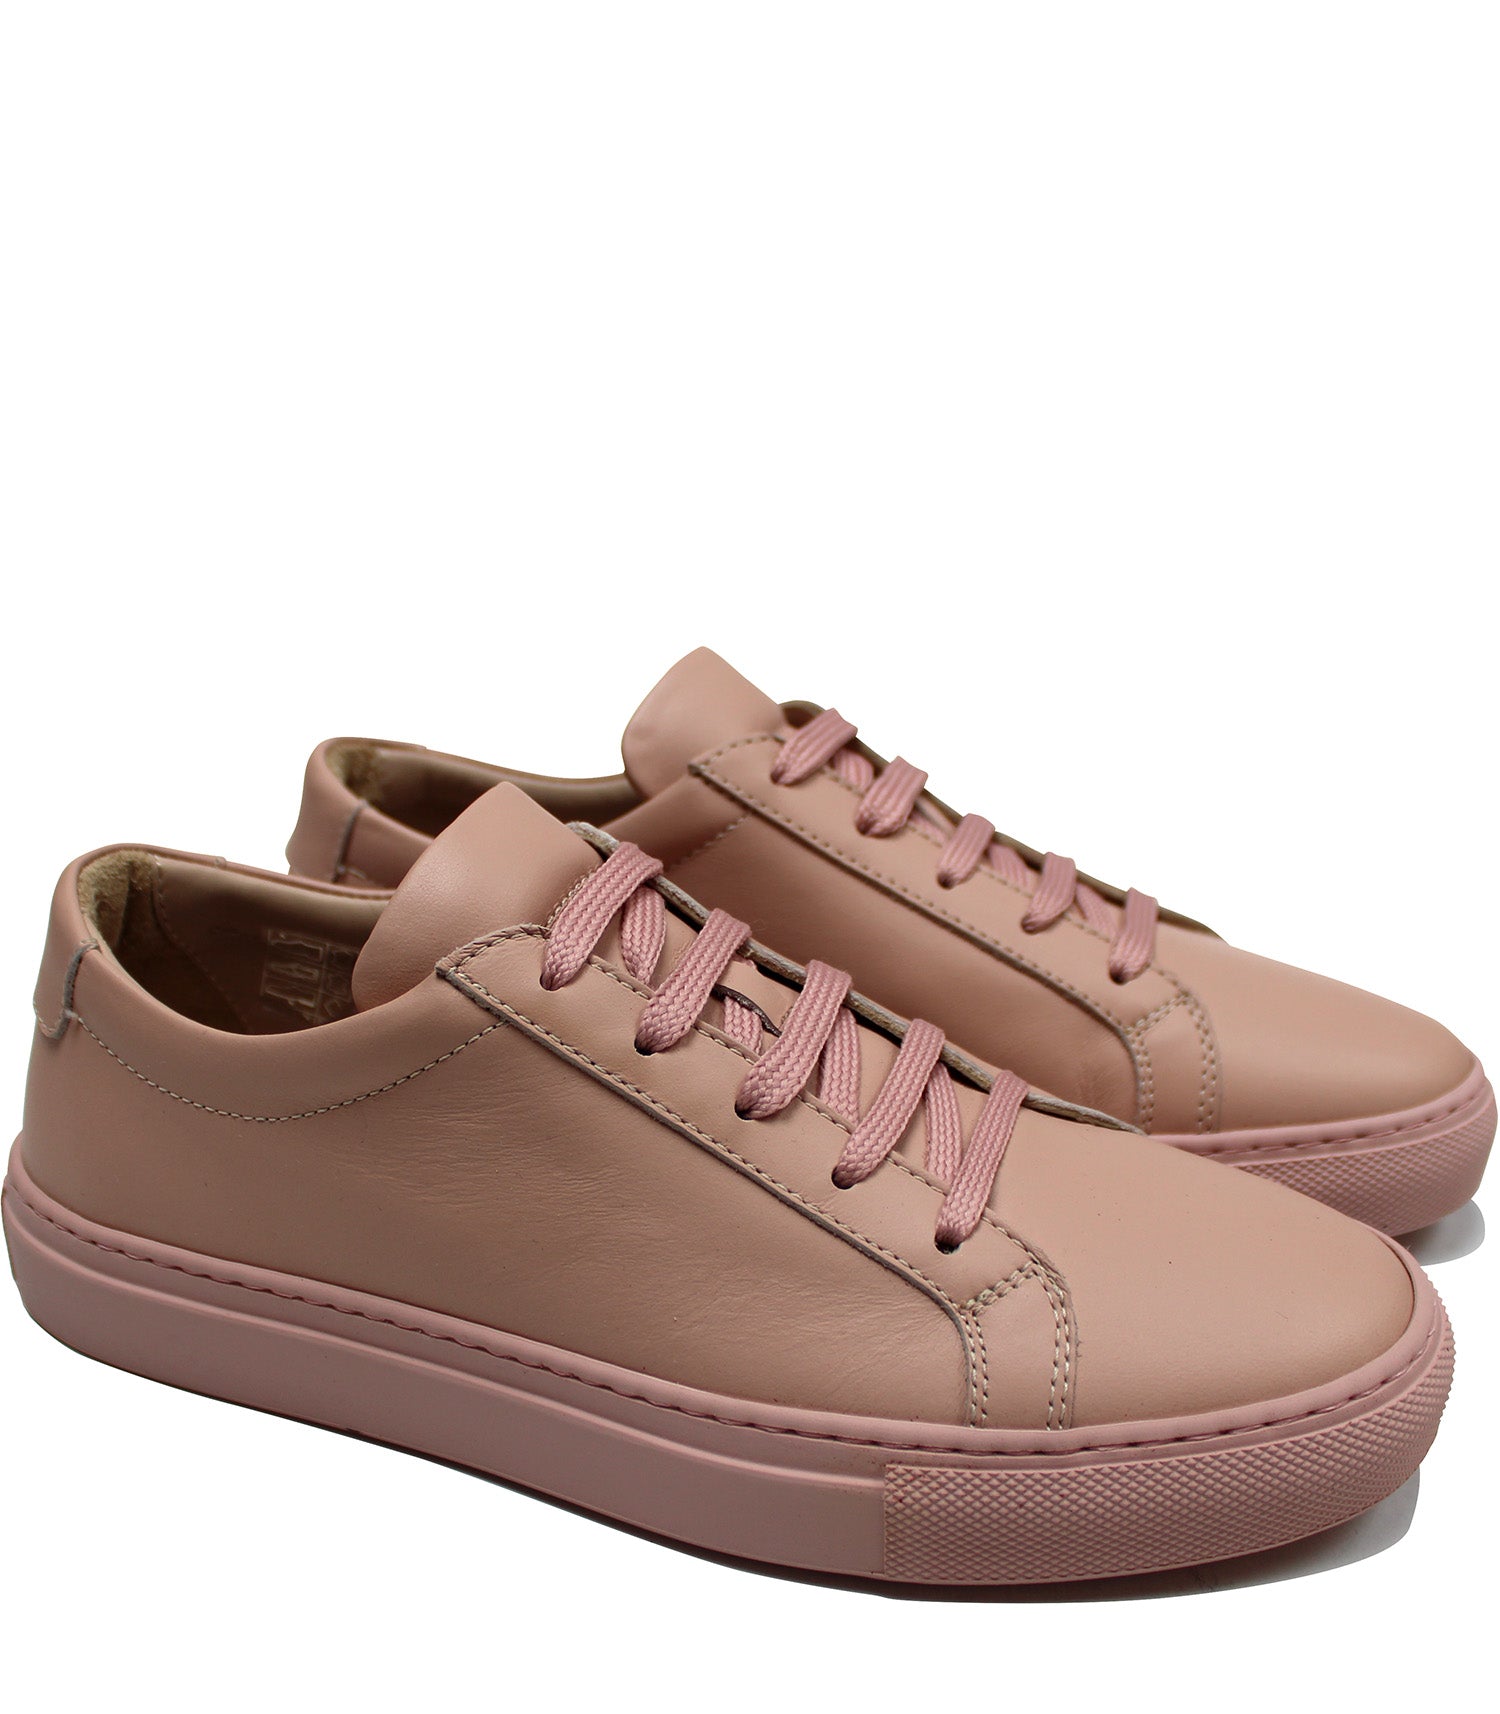 Pale pink sneakers – Gallucci Shoes